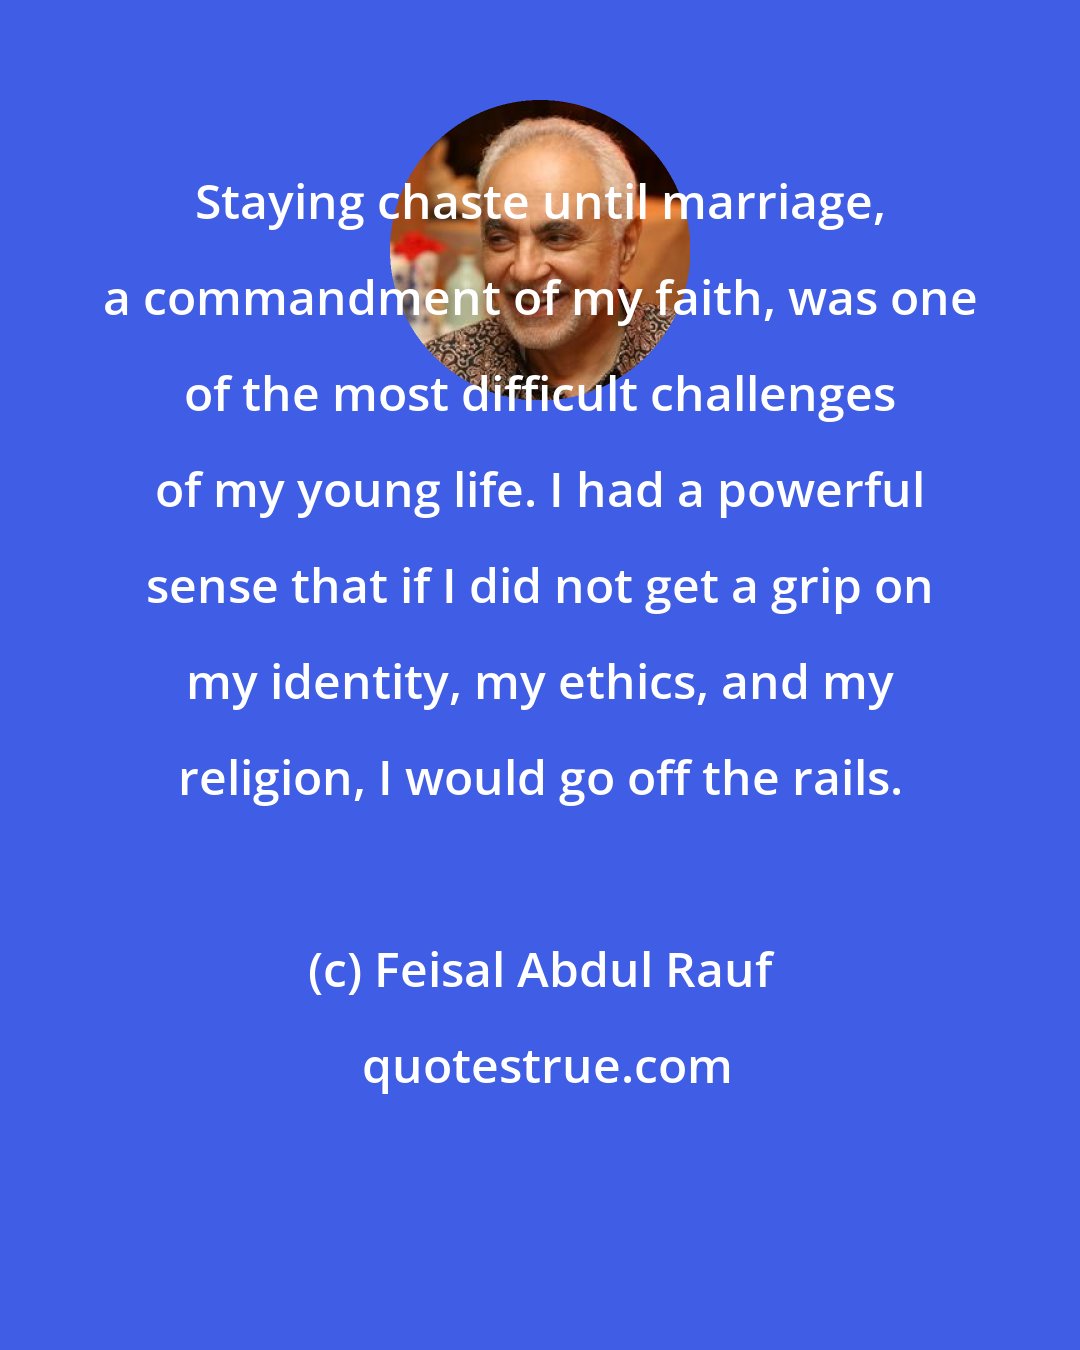 Feisal Abdul Rauf: Staying chaste until marriage, a commandment of my faith, was one of the most difficult challenges of my young life. I had a powerful sense that if I did not get a grip on my identity, my ethics, and my religion, I would go off the rails.